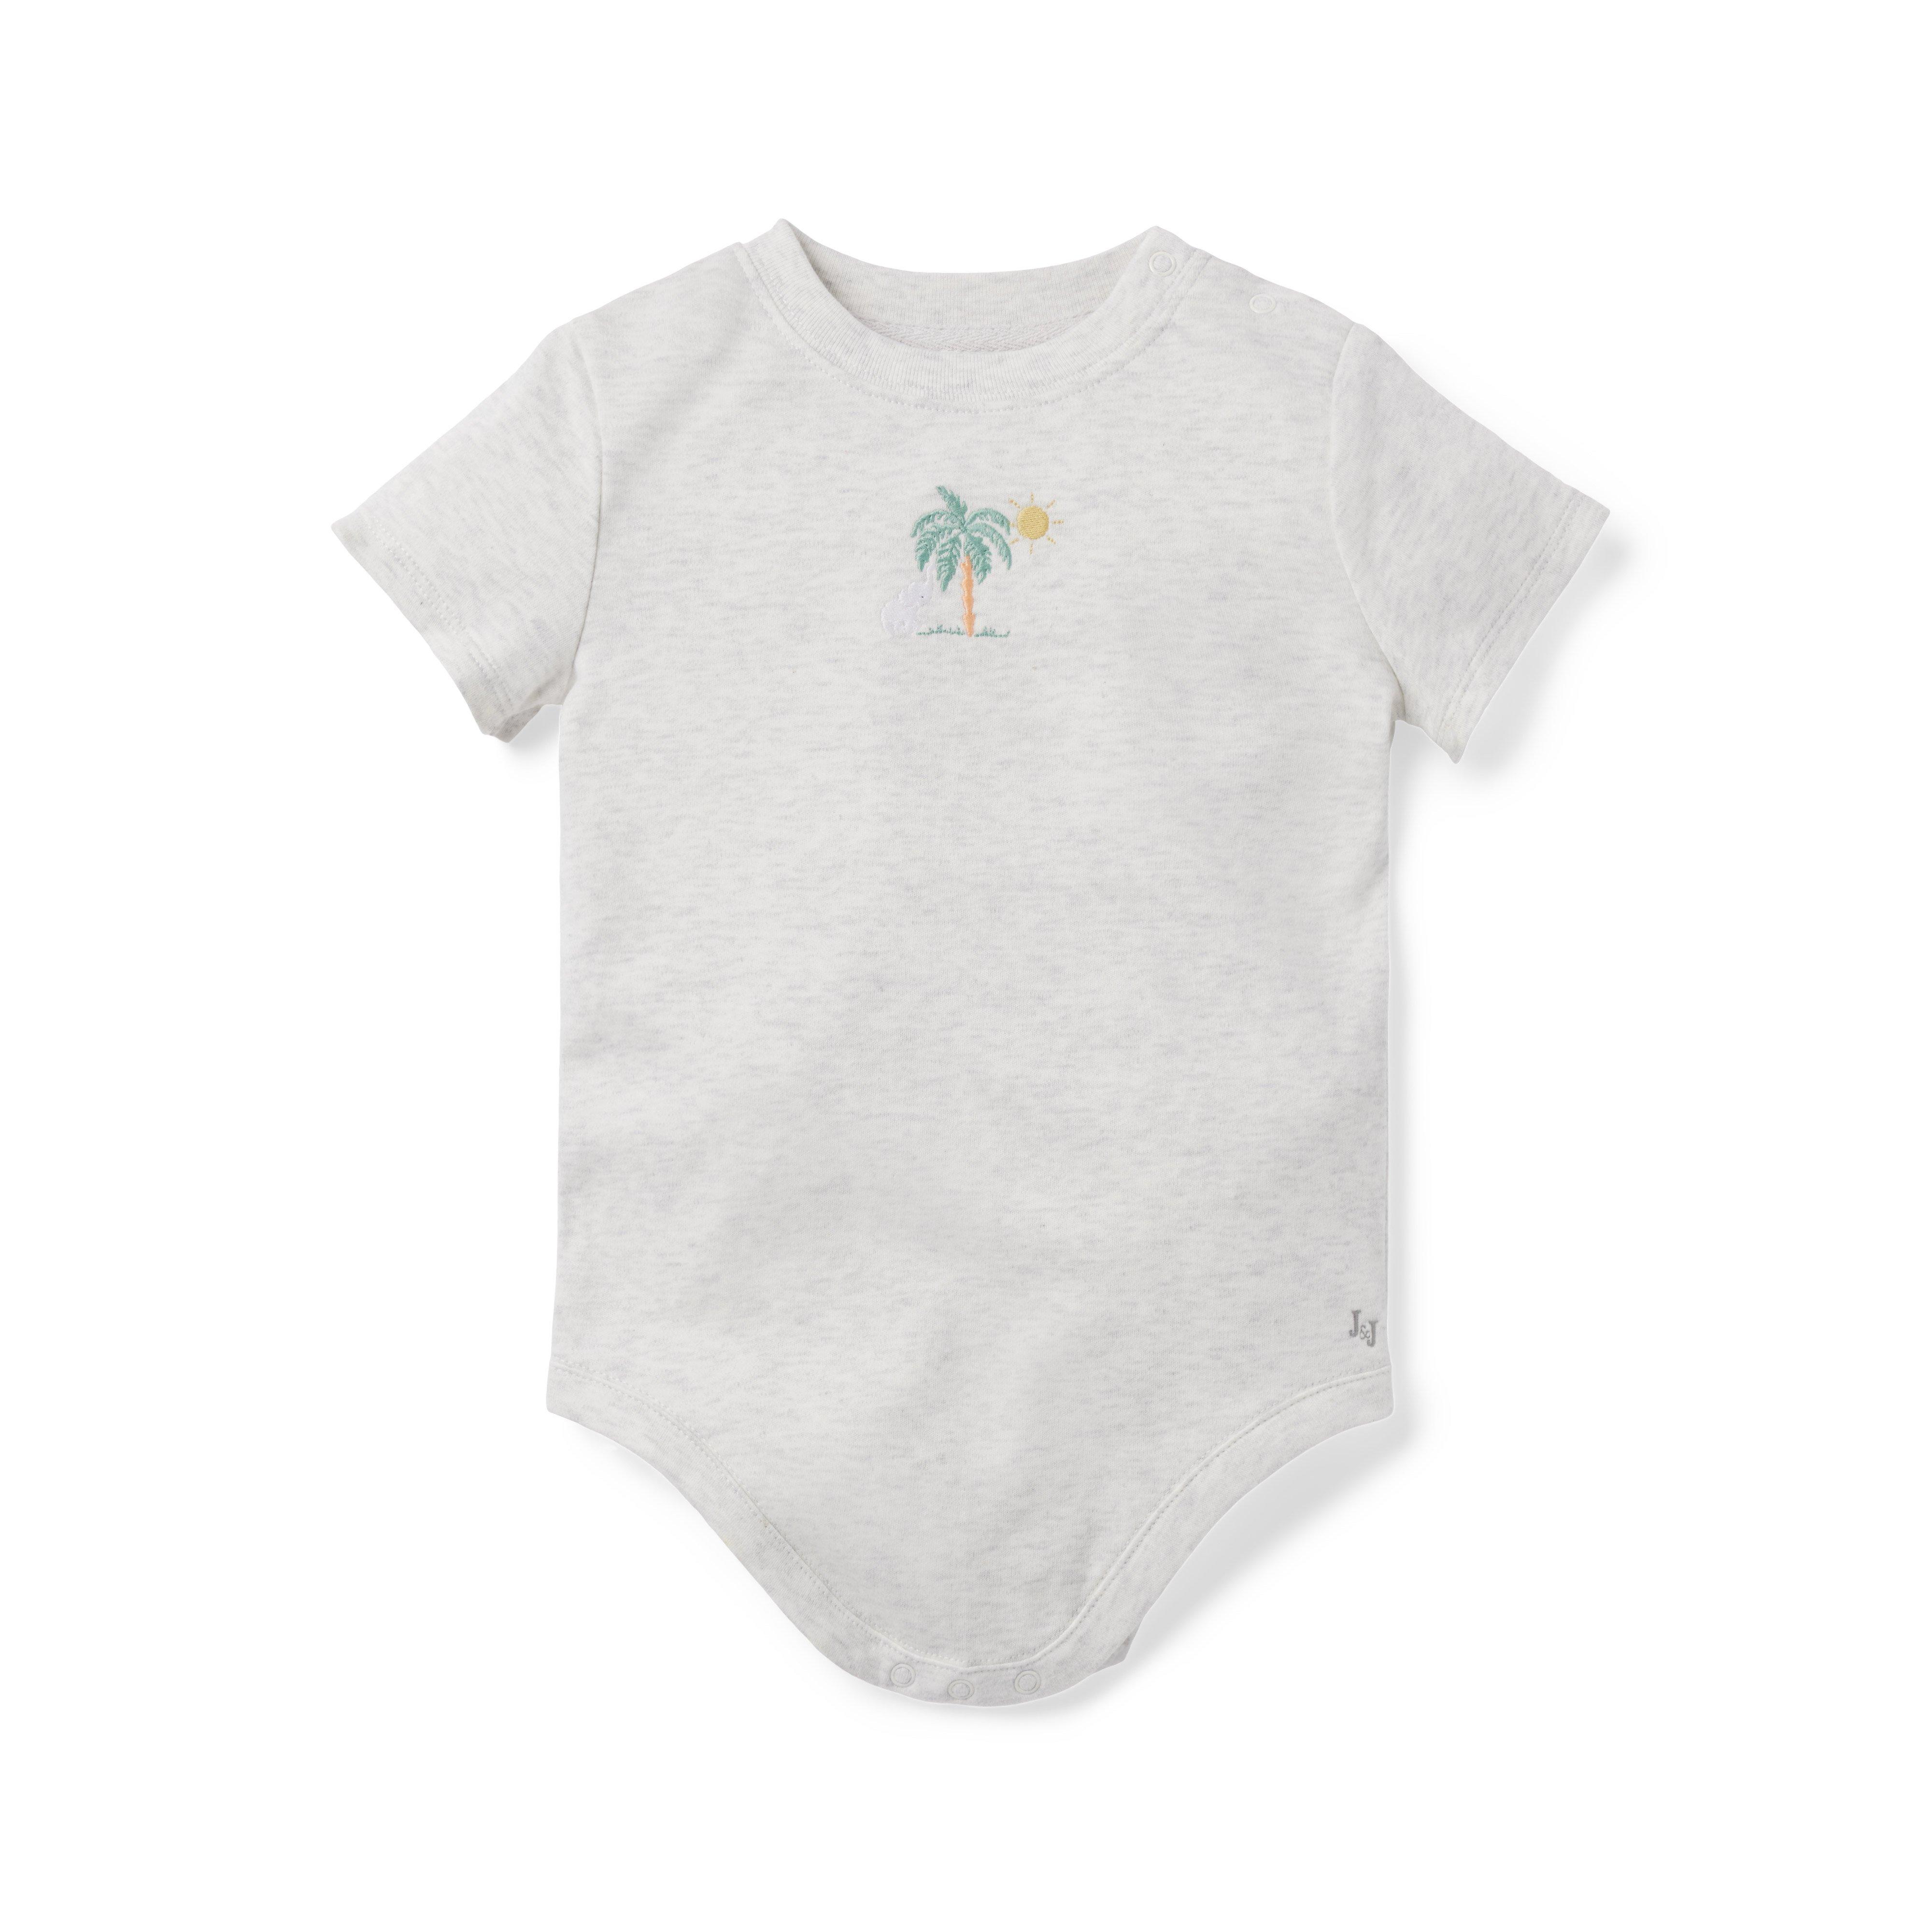 Baby Embroidered Elephant Palm Tree Bodysuit